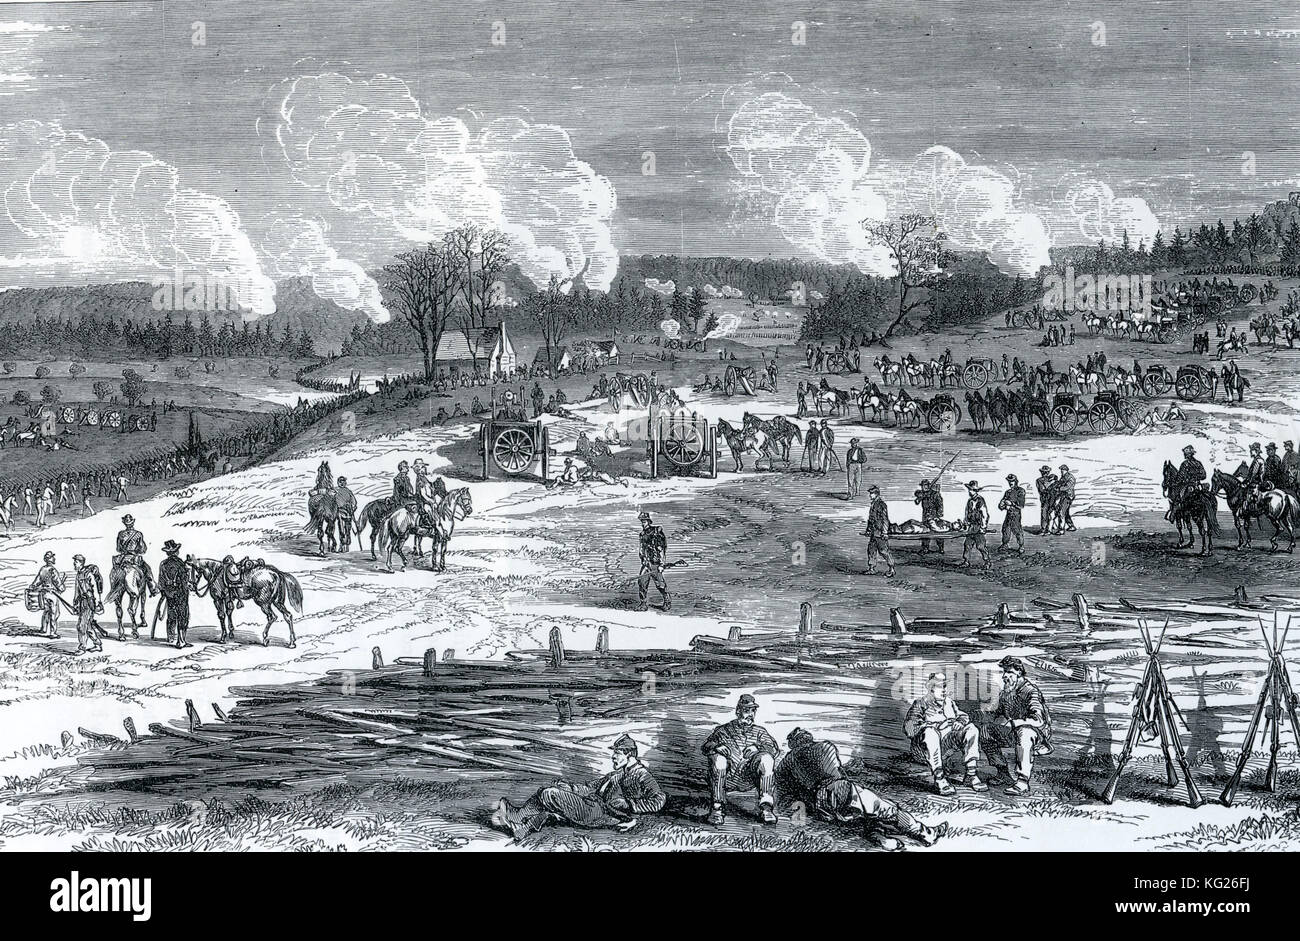 AMERICAN CIVIL WAR : The Battle of Spotsylvania Courthouse - Alsop's Farm in May 1864 with Union soldiers resting and gun trains being limbered up. Stock Photo